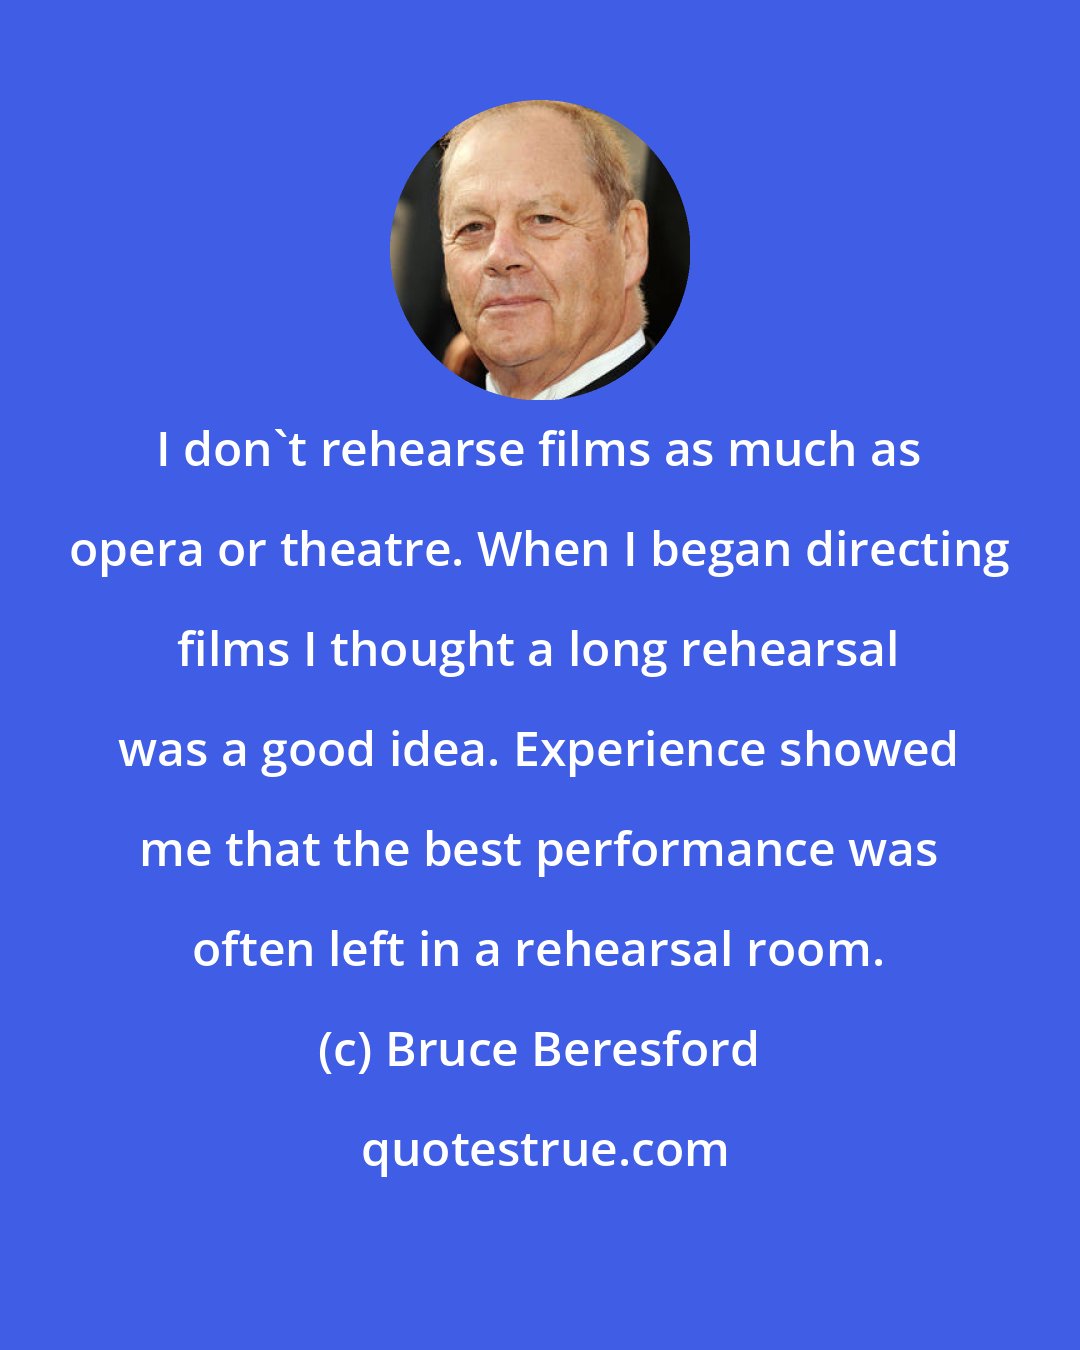 Bruce Beresford: I don't rehearse films as much as opera or theatre. When I began directing films I thought a long rehearsal was a good idea. Experience showed me that the best performance was often left in a rehearsal room.